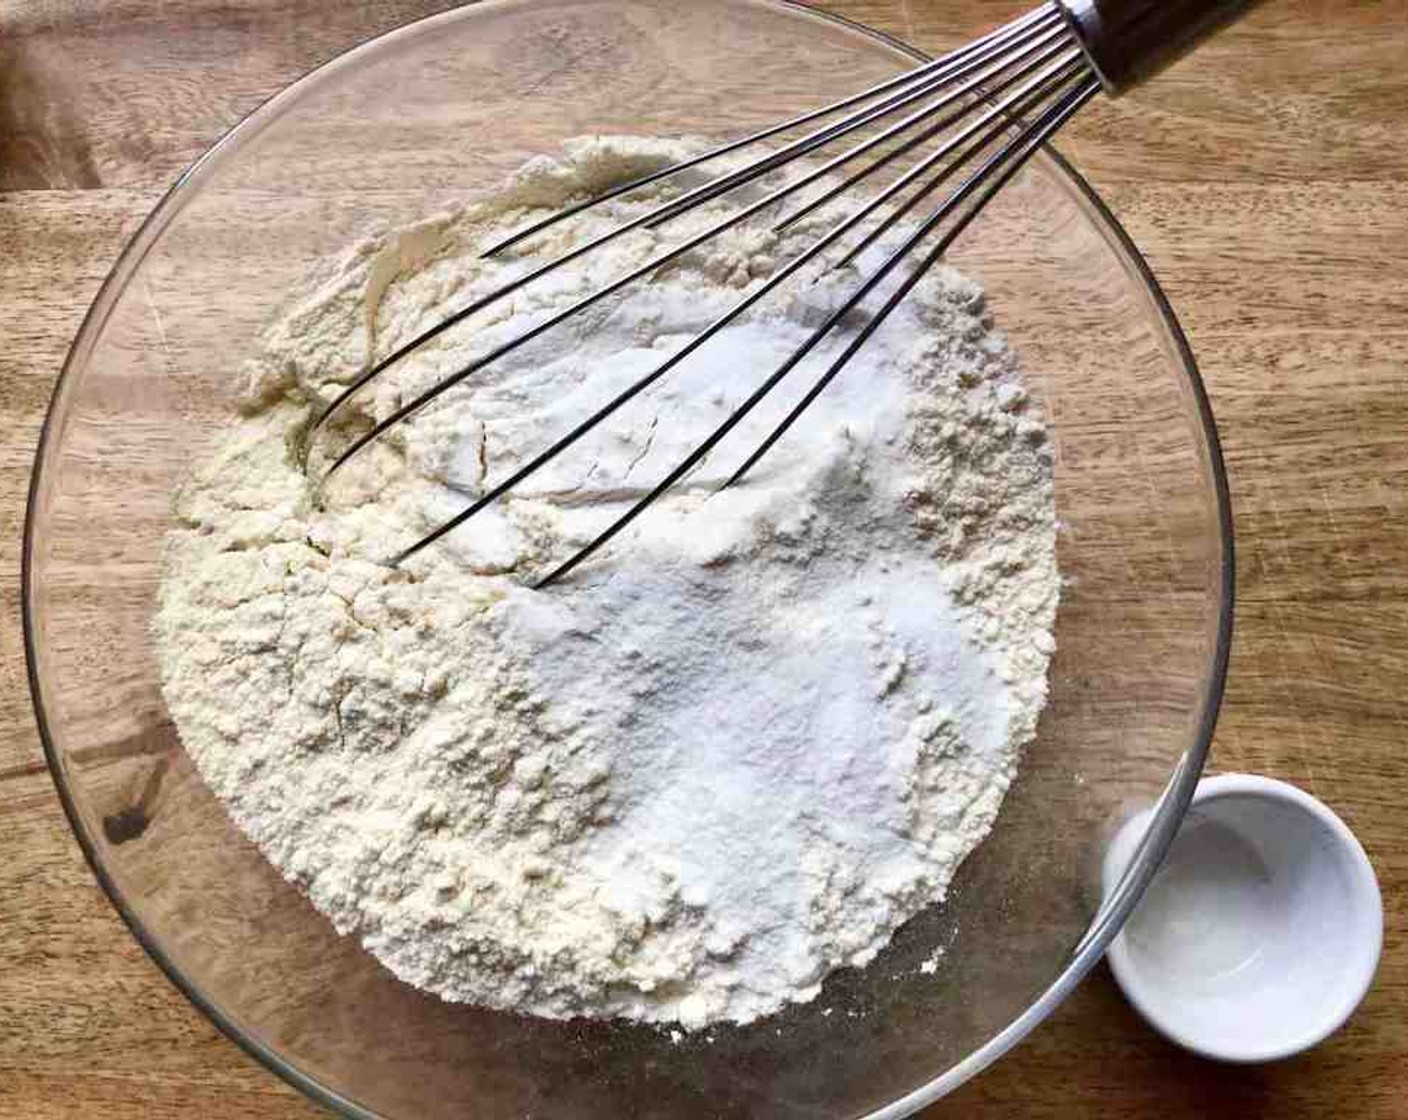 step 2 In a medium mixing bowl, whisk together the Unbleached All Purpose Flour (2 1/2 cups), Baking Soda (1 tsp), and Salt (1/4 tsp).